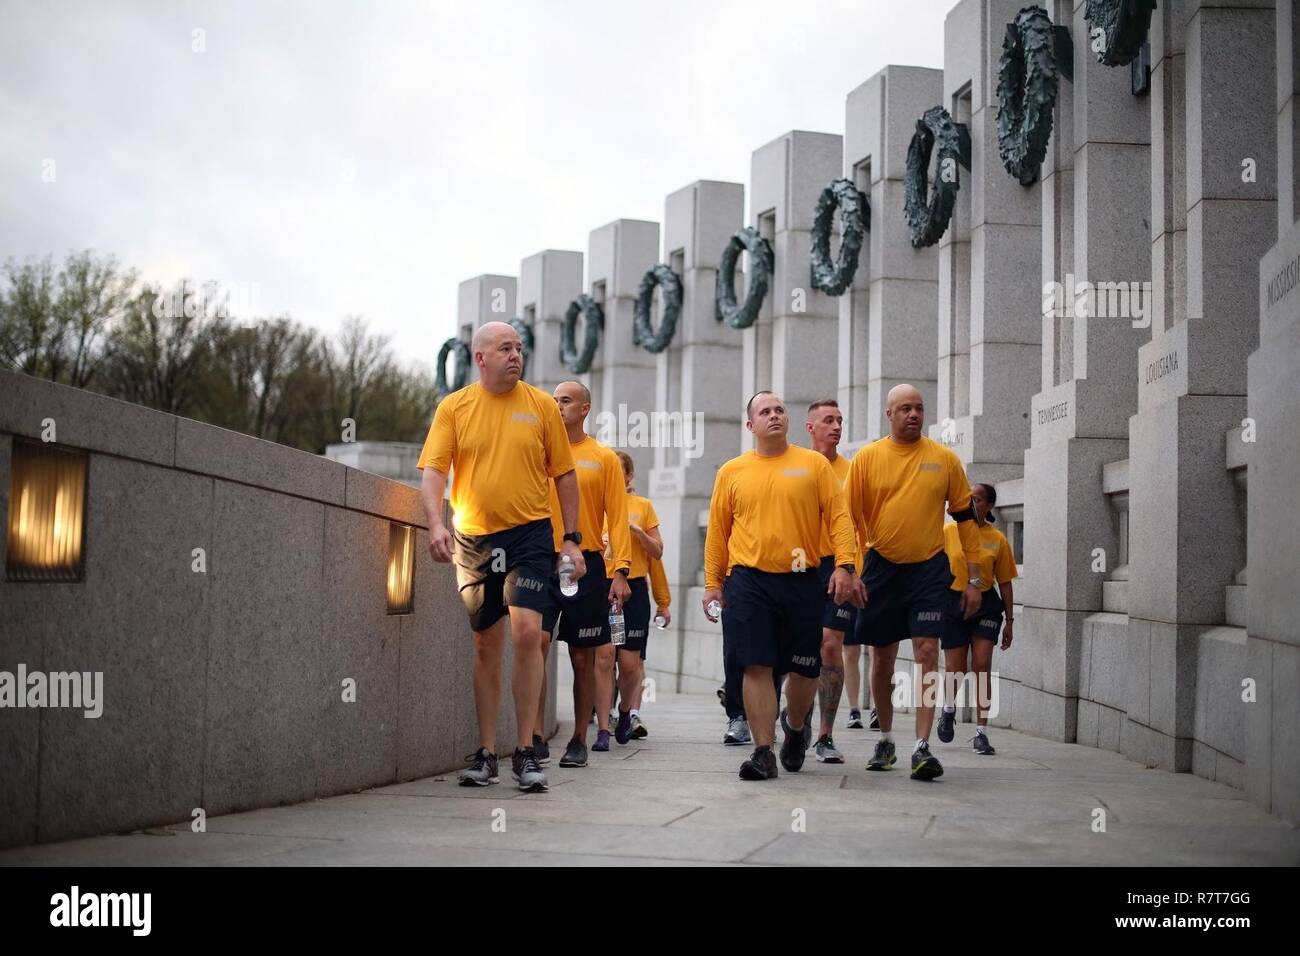 WASHINGTON (April 4, 2017) Navy Reserve Force Master Chief C.J. Mitchell, right, finalists for the Navy Reserve Sailor of the Year and members of the Reserve Sailor of the Year selection board participate in a run at the National Mall during Reserve Sailor of the Year selection board and recognition ceremony week. Chief of Naval Operations Adm. Elmo Zumwalt and Master Chief Petty Officer of the Navy Jack Whittet initiated the Sailor of the Year program in 1972 to recognize outstanding Atlantic and Pacific Fleet Sailors. Stock Photo